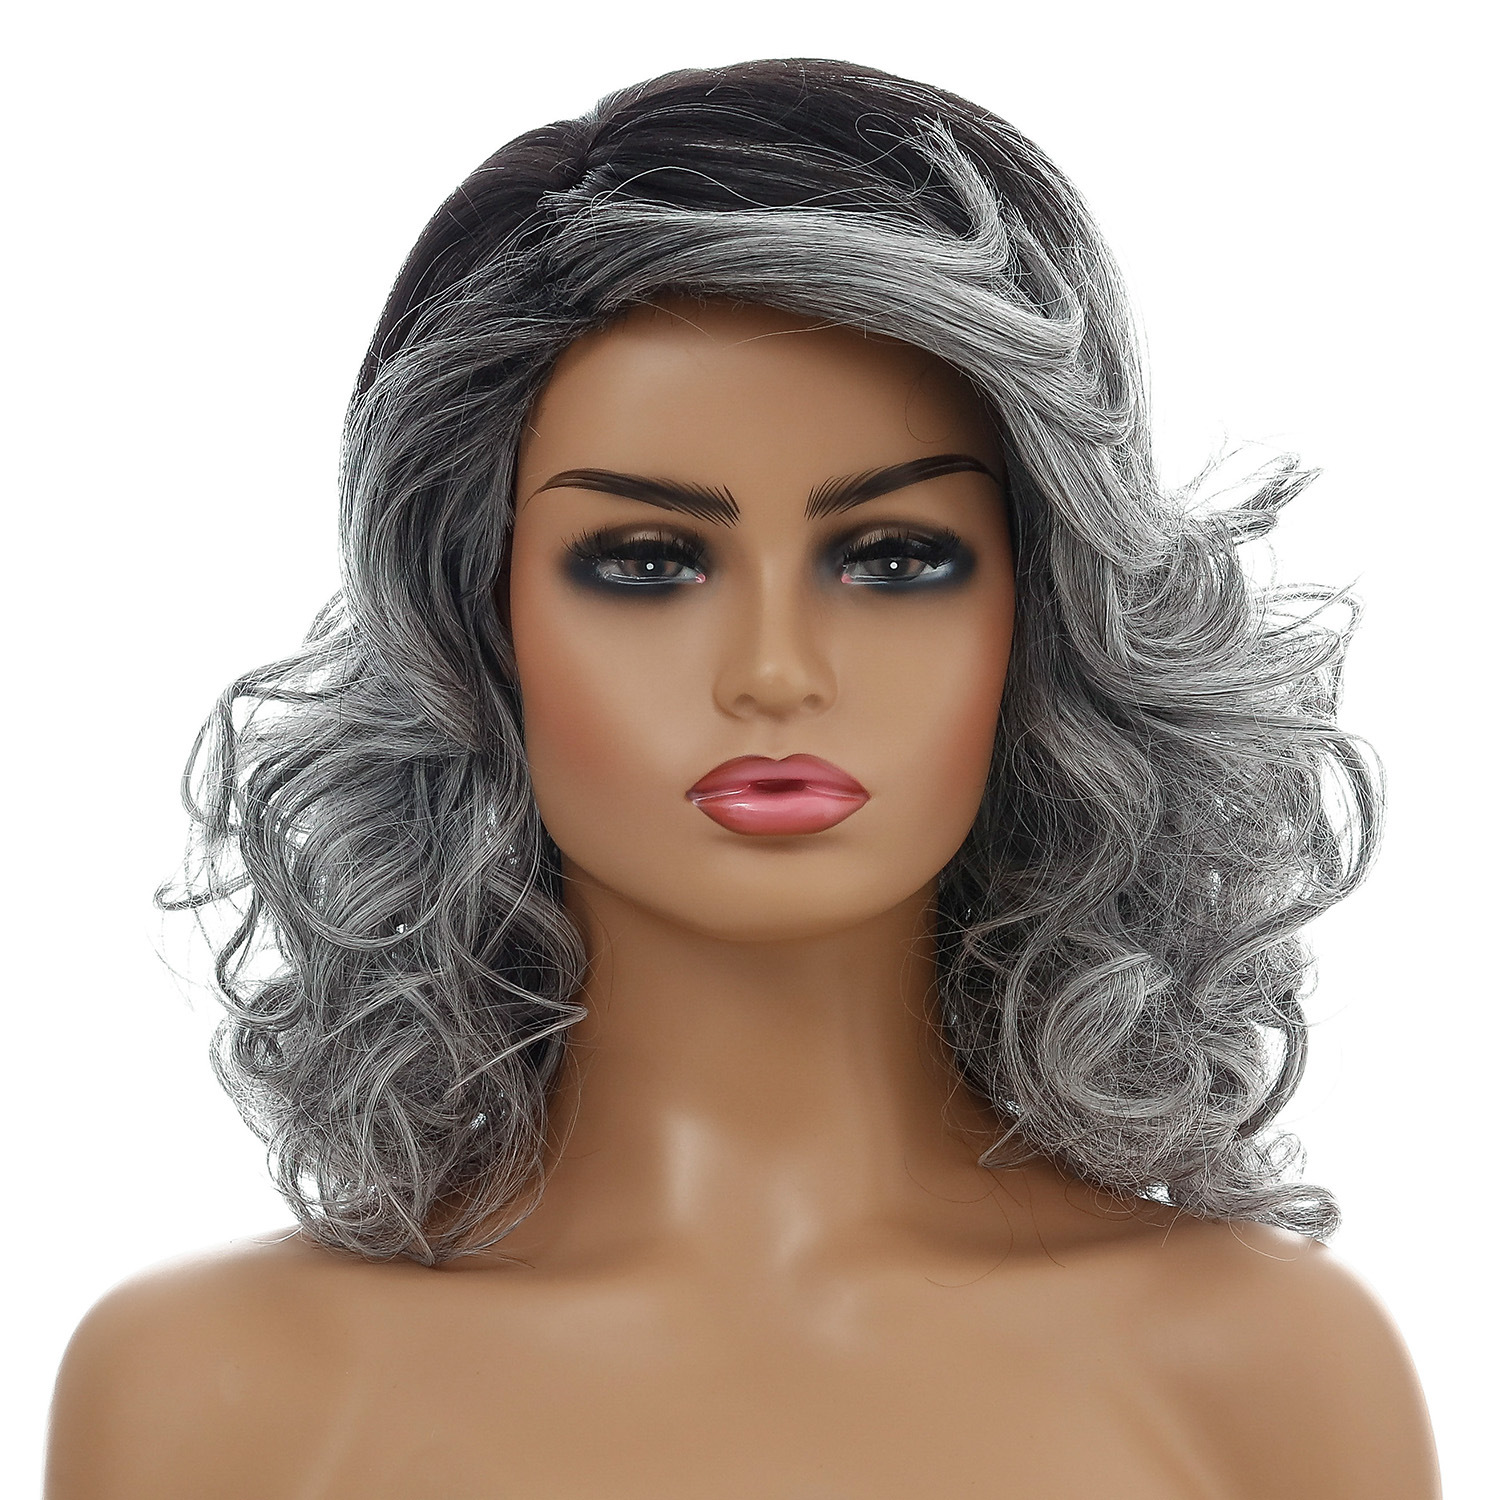 Stylish black silver synthetic wig featuring medium-length curly hair, designed for women